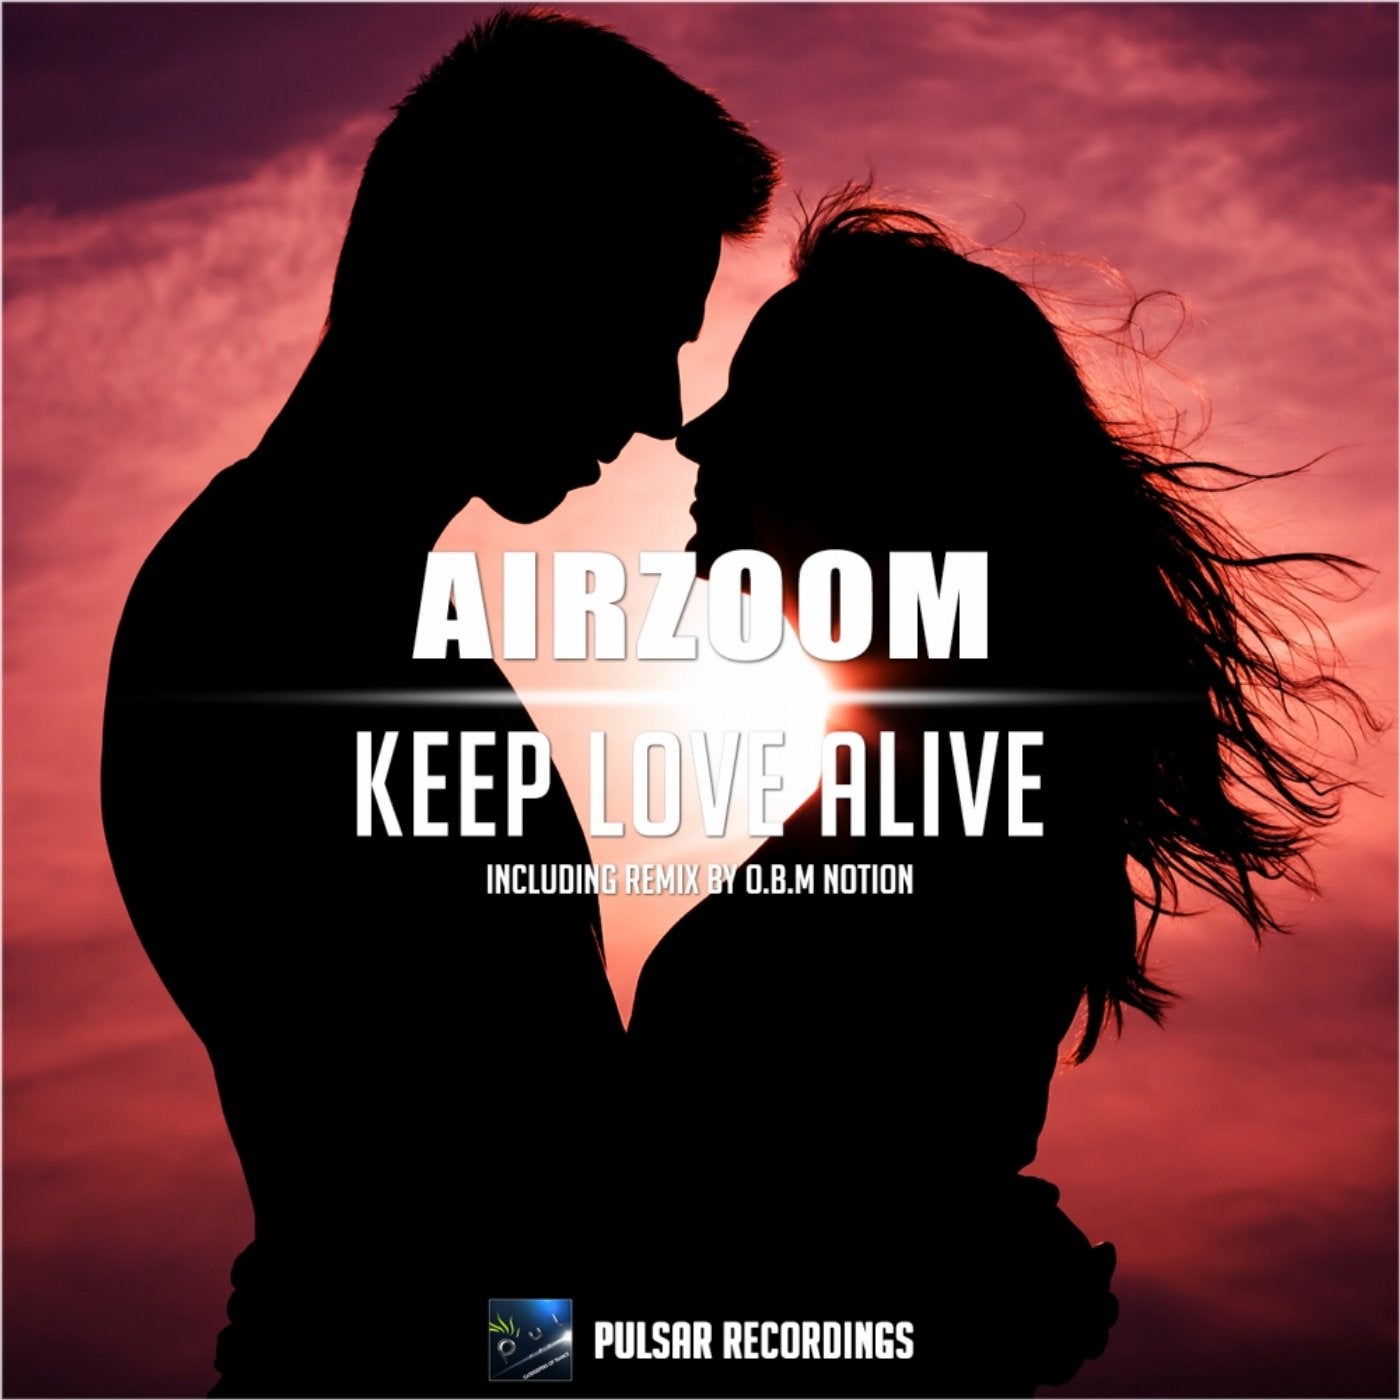 Keep your love. -Love Alive-. Keep Love. Airzoom - keep Love Alive (Paul Hided feat. Andi Vax Live Guitar 2016 Rework). Guitar Remix.